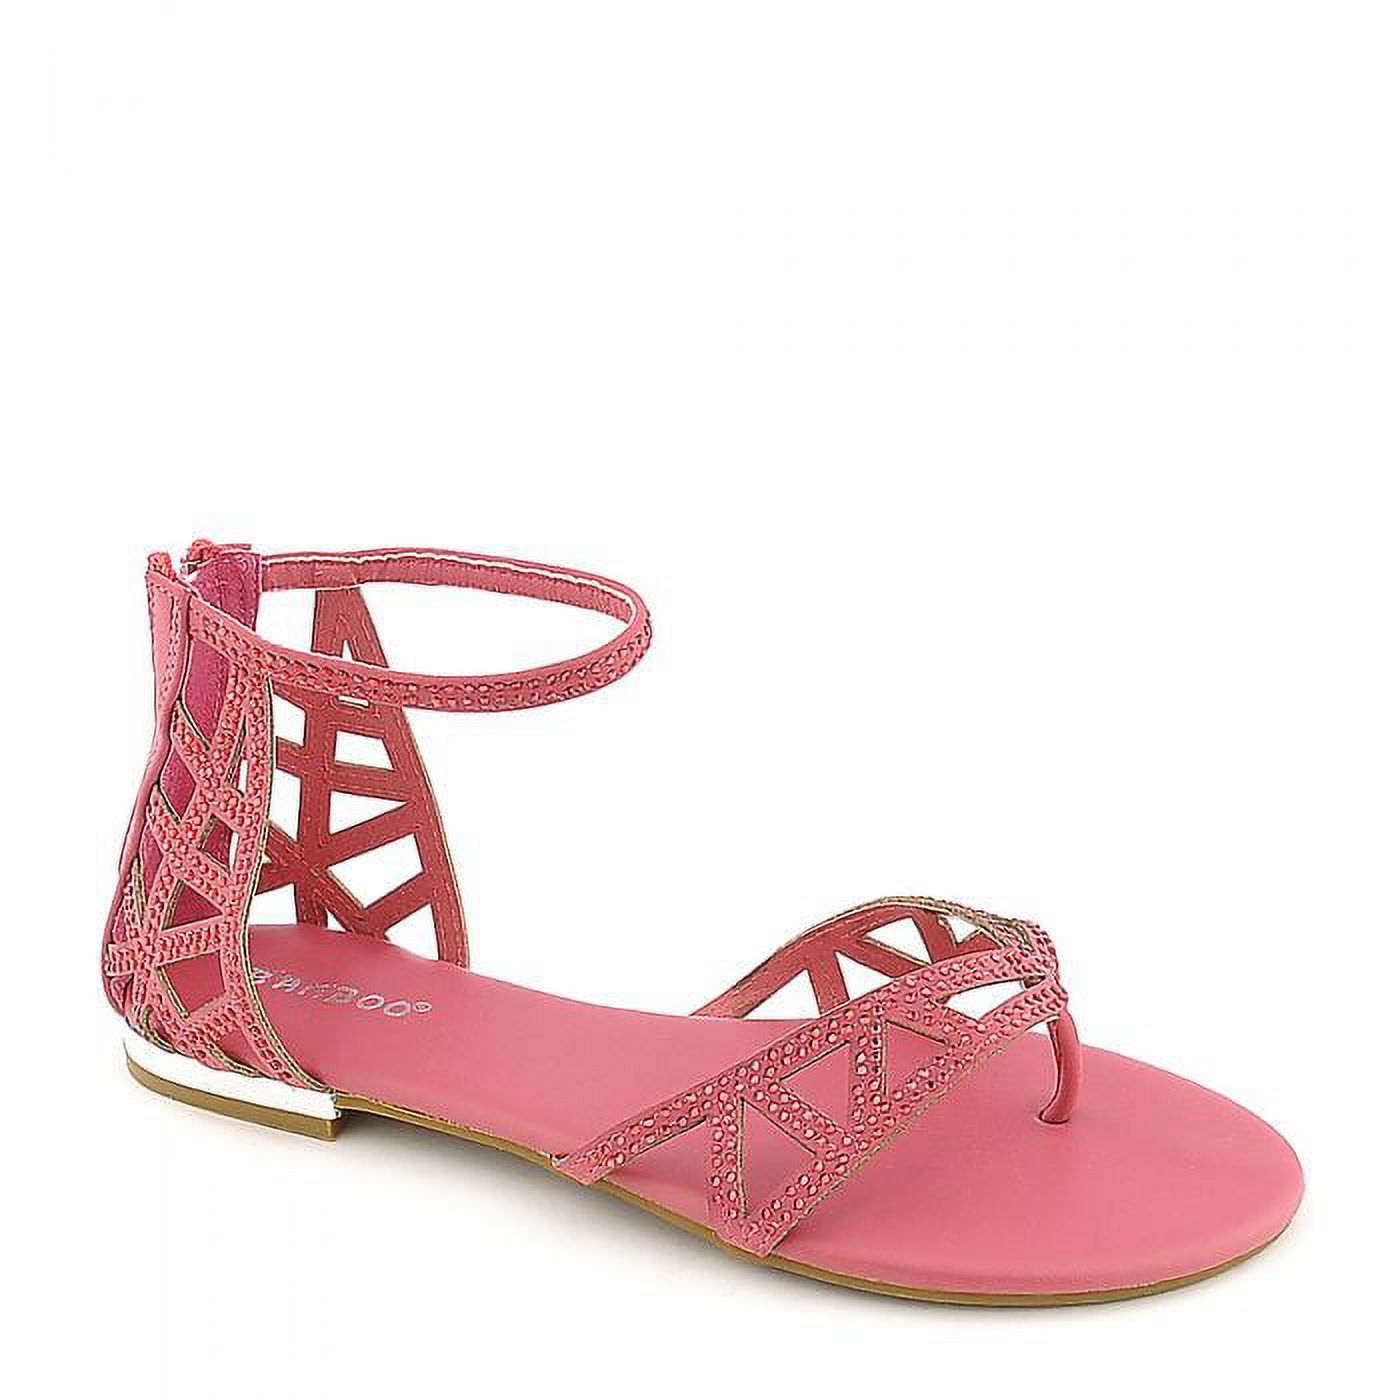 Bamboo Jeweled Cut-out Thong Flat Shoe Sandals - image 1 of 5